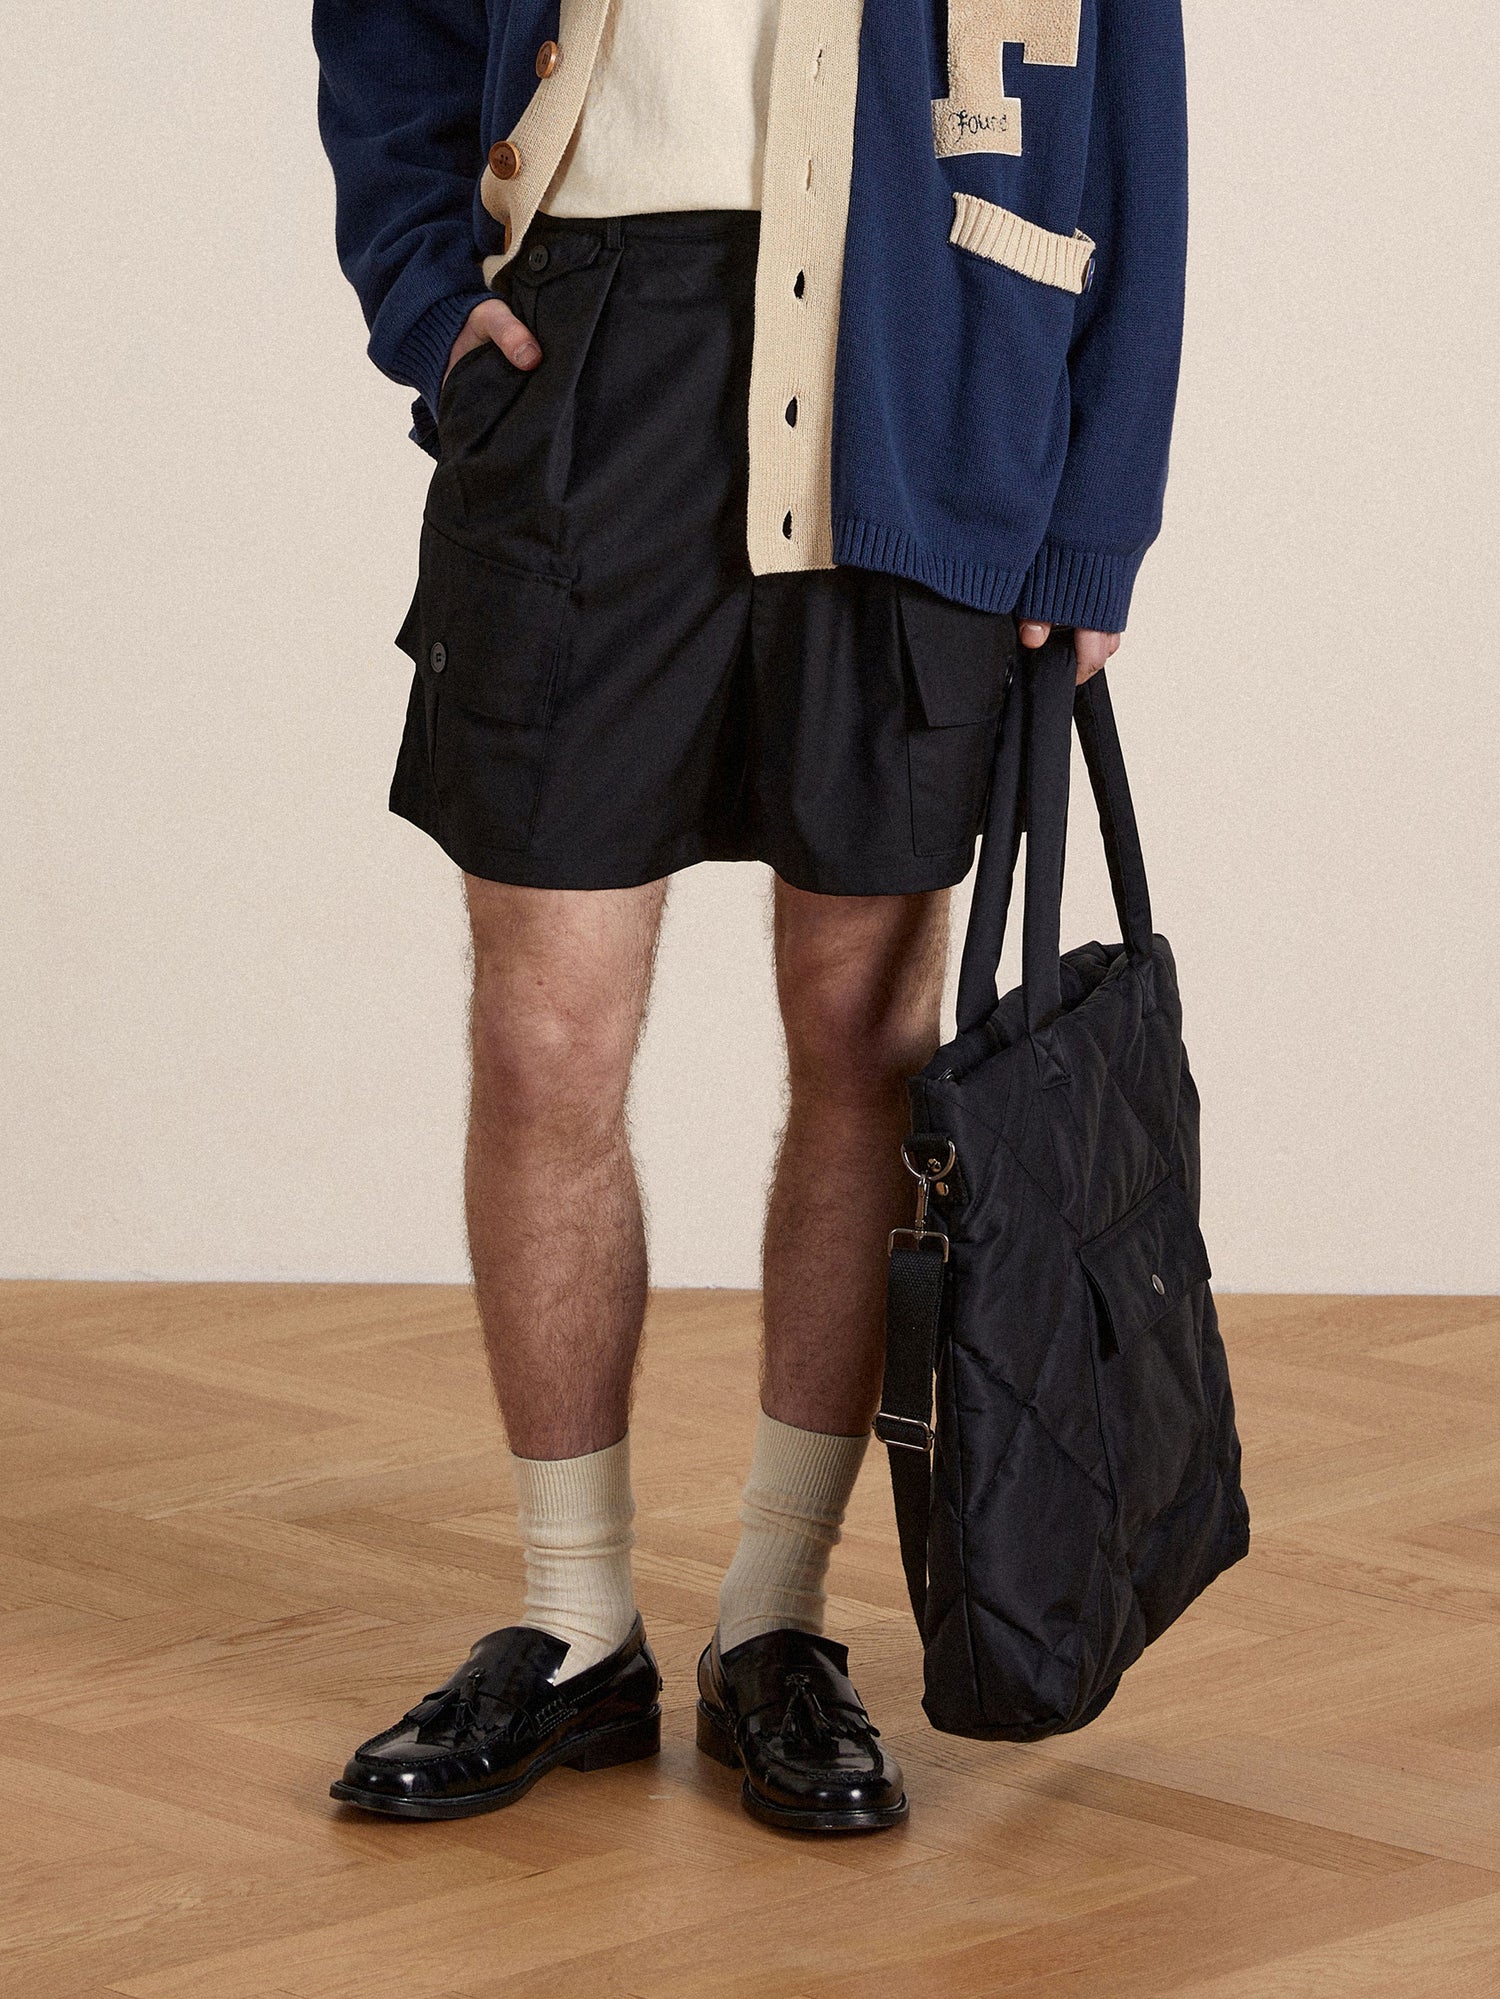 A man in Found Pleated Pocket Cargo Shorts and a sweater holding a bag.